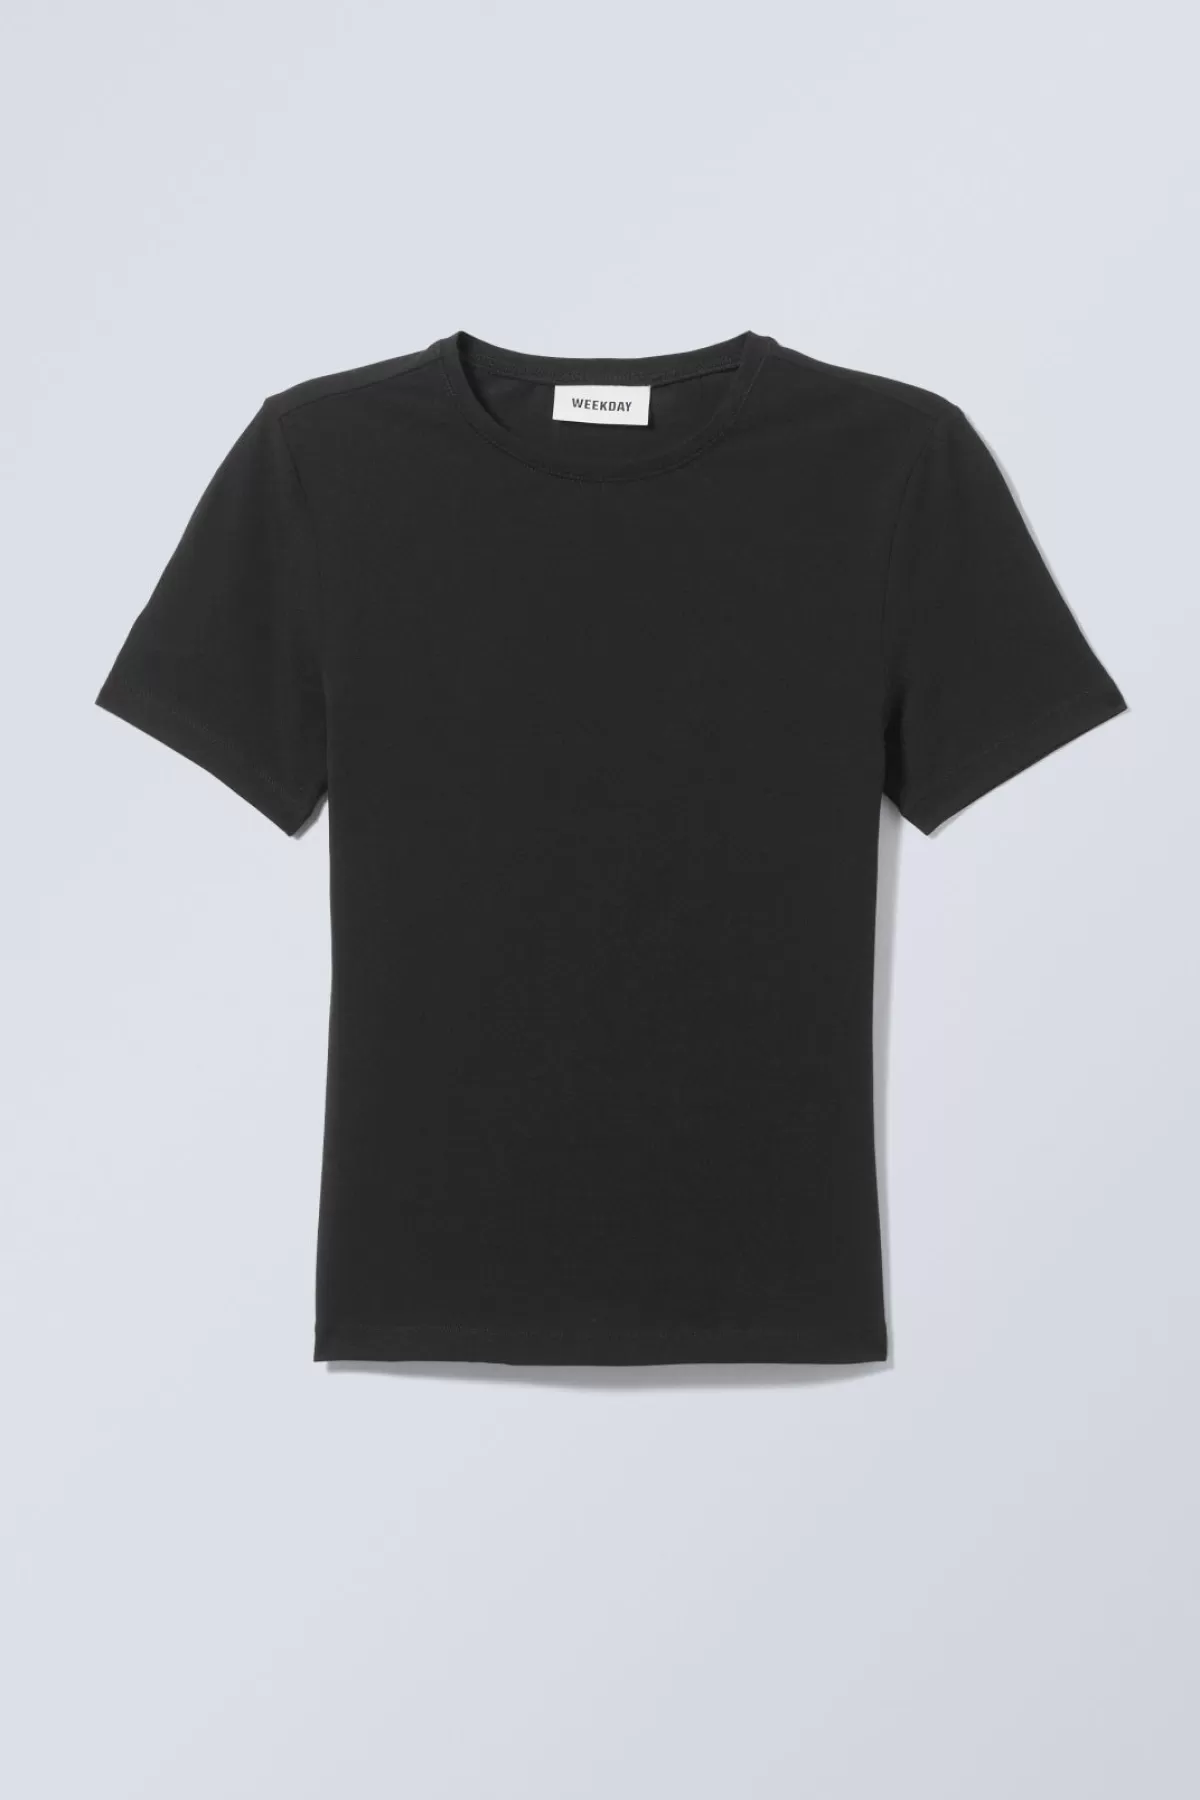 Weekday Slim Fitted T- shirt Clearance